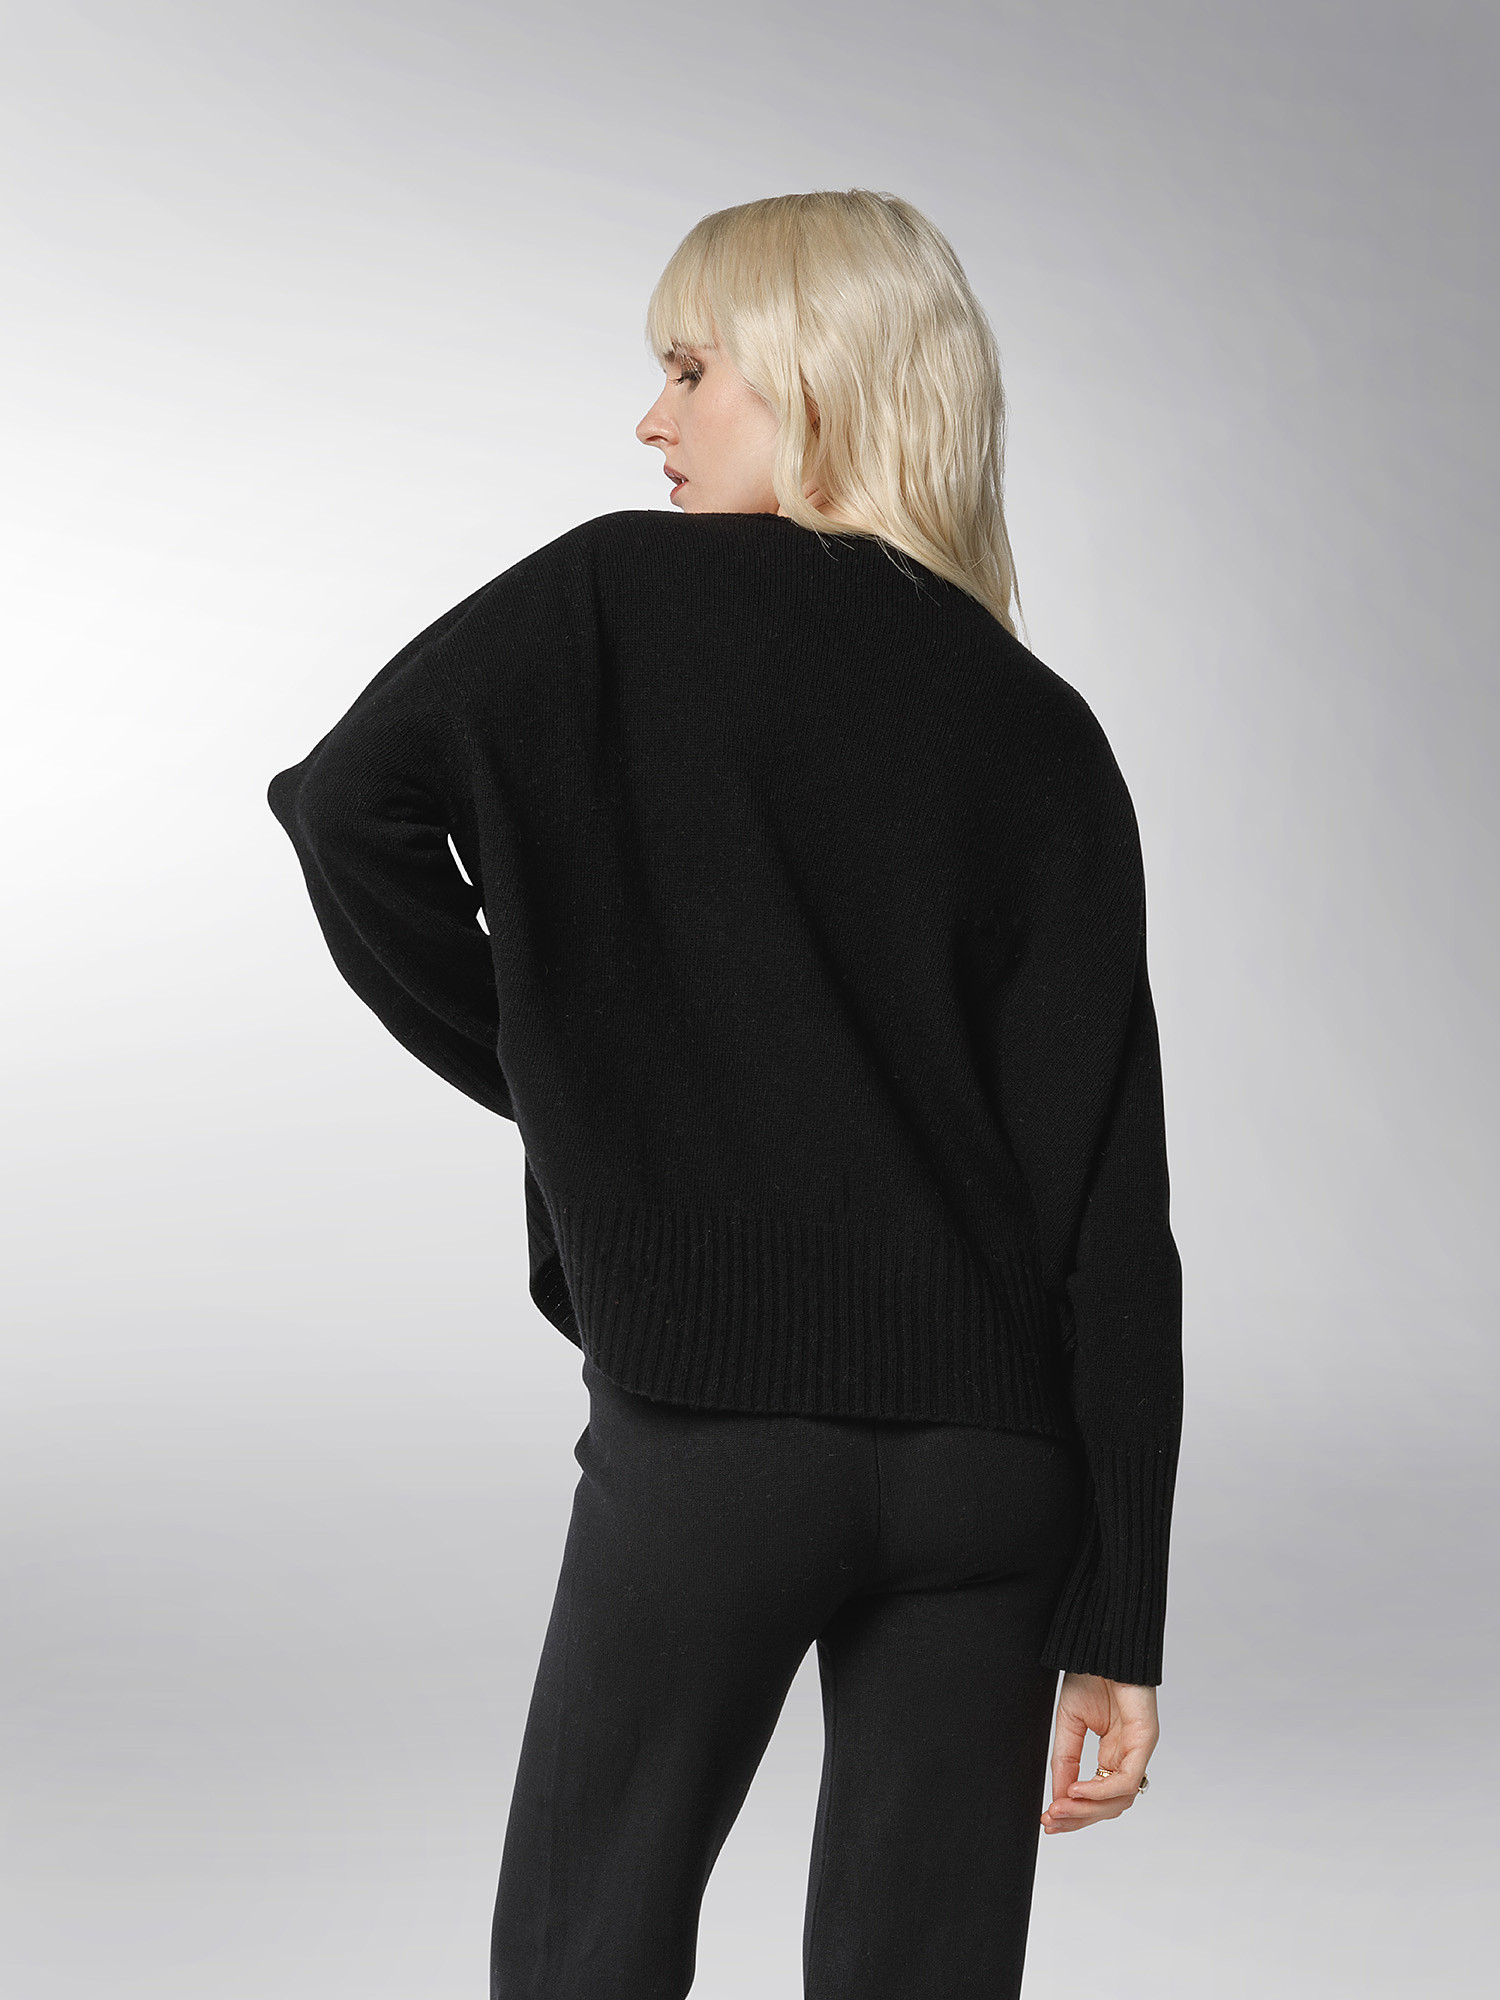 K Collection - Carded wool pullover, Black, large image number 4